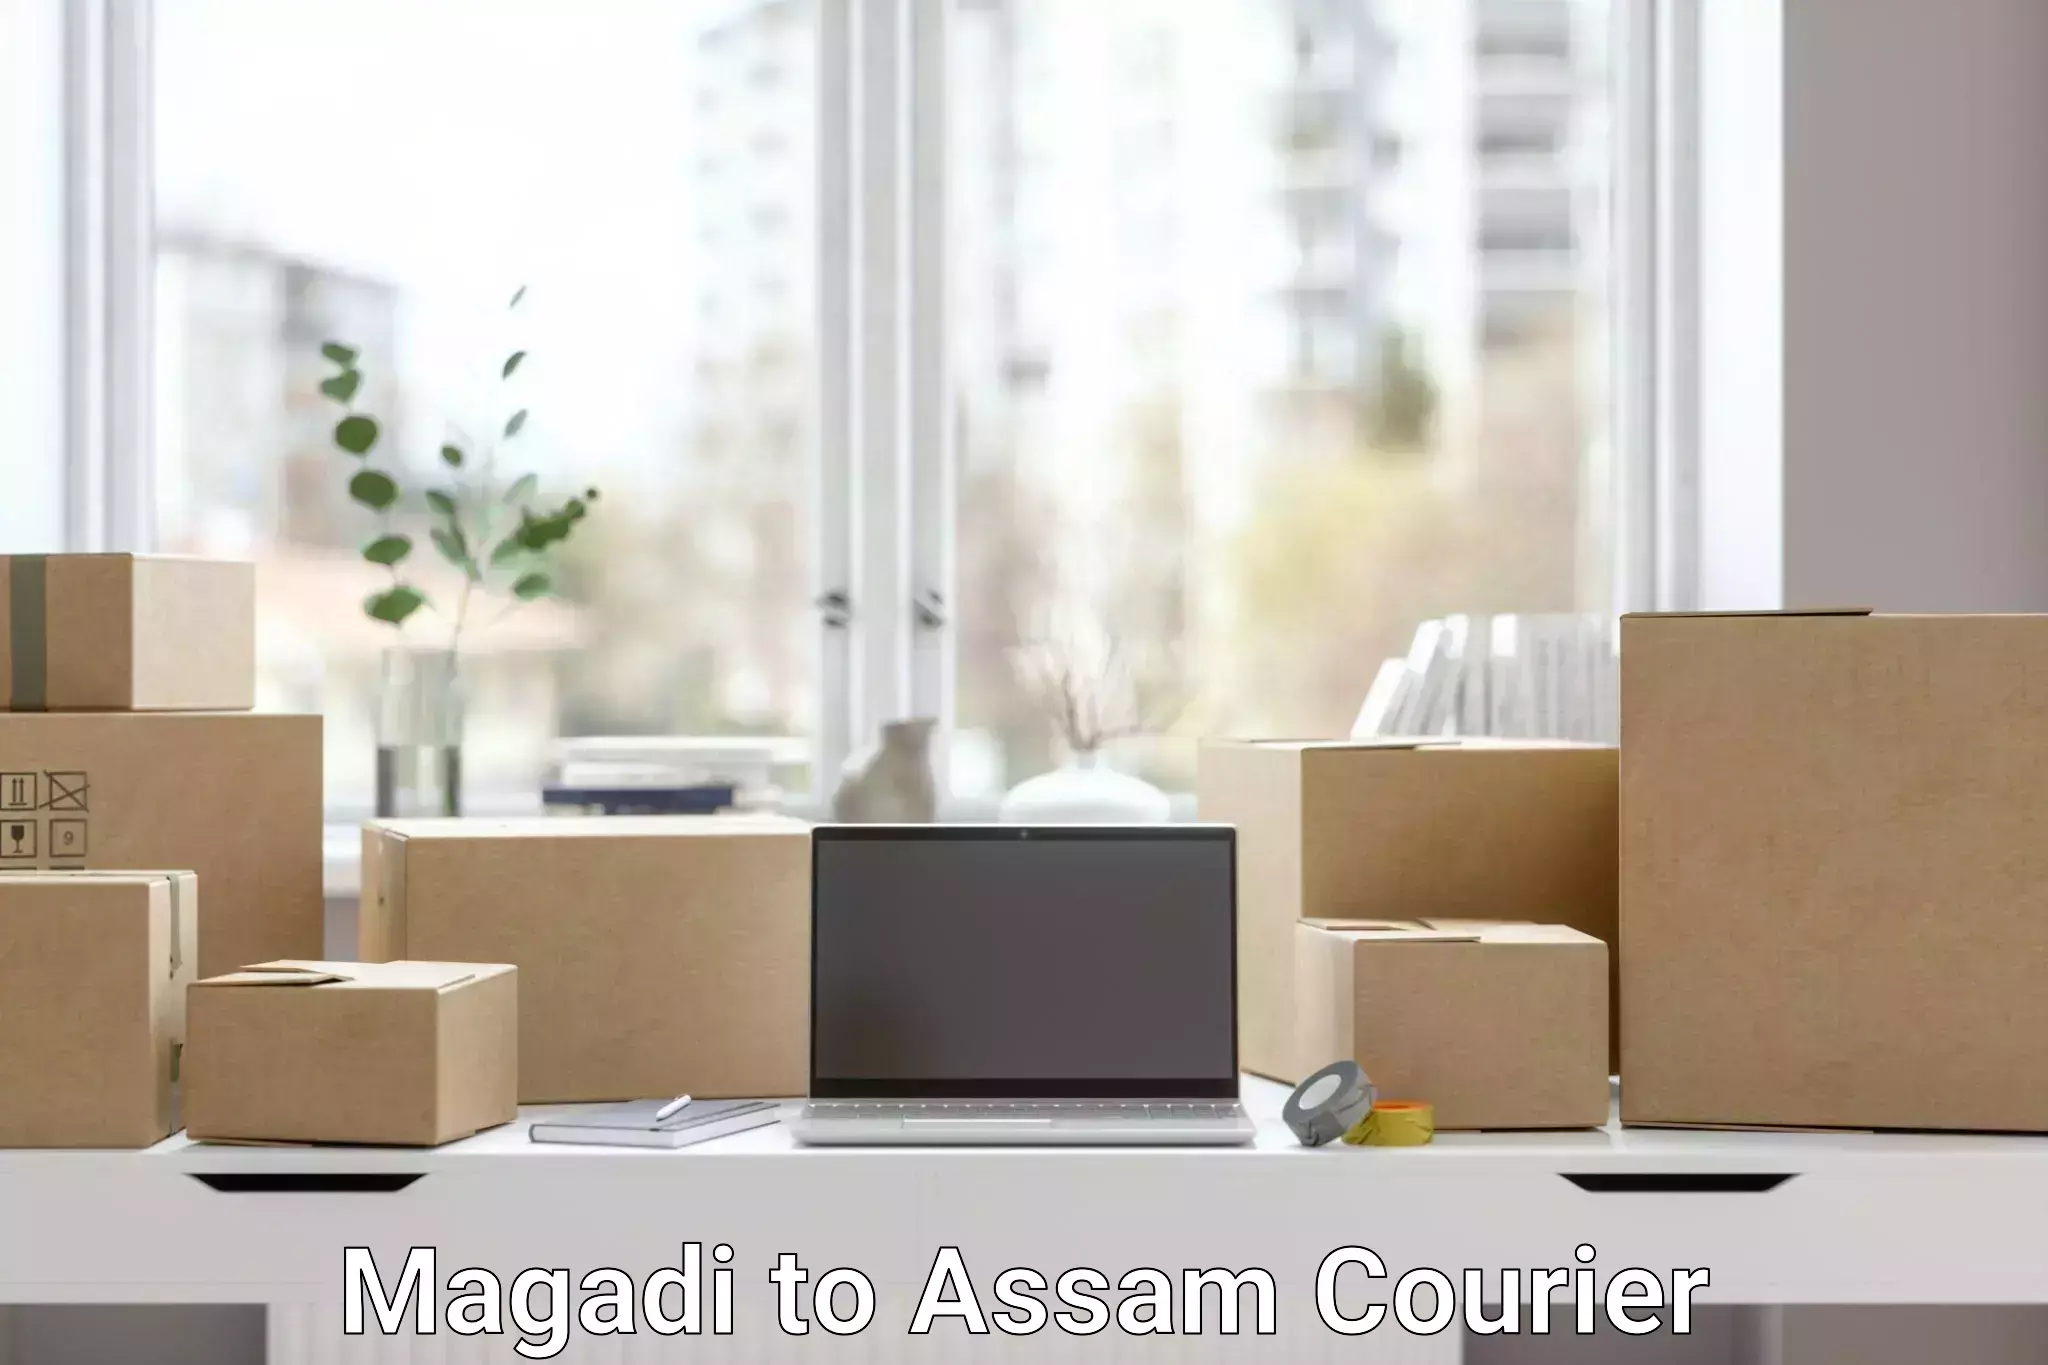 Nationwide parcel services Magadi to Lala Assam